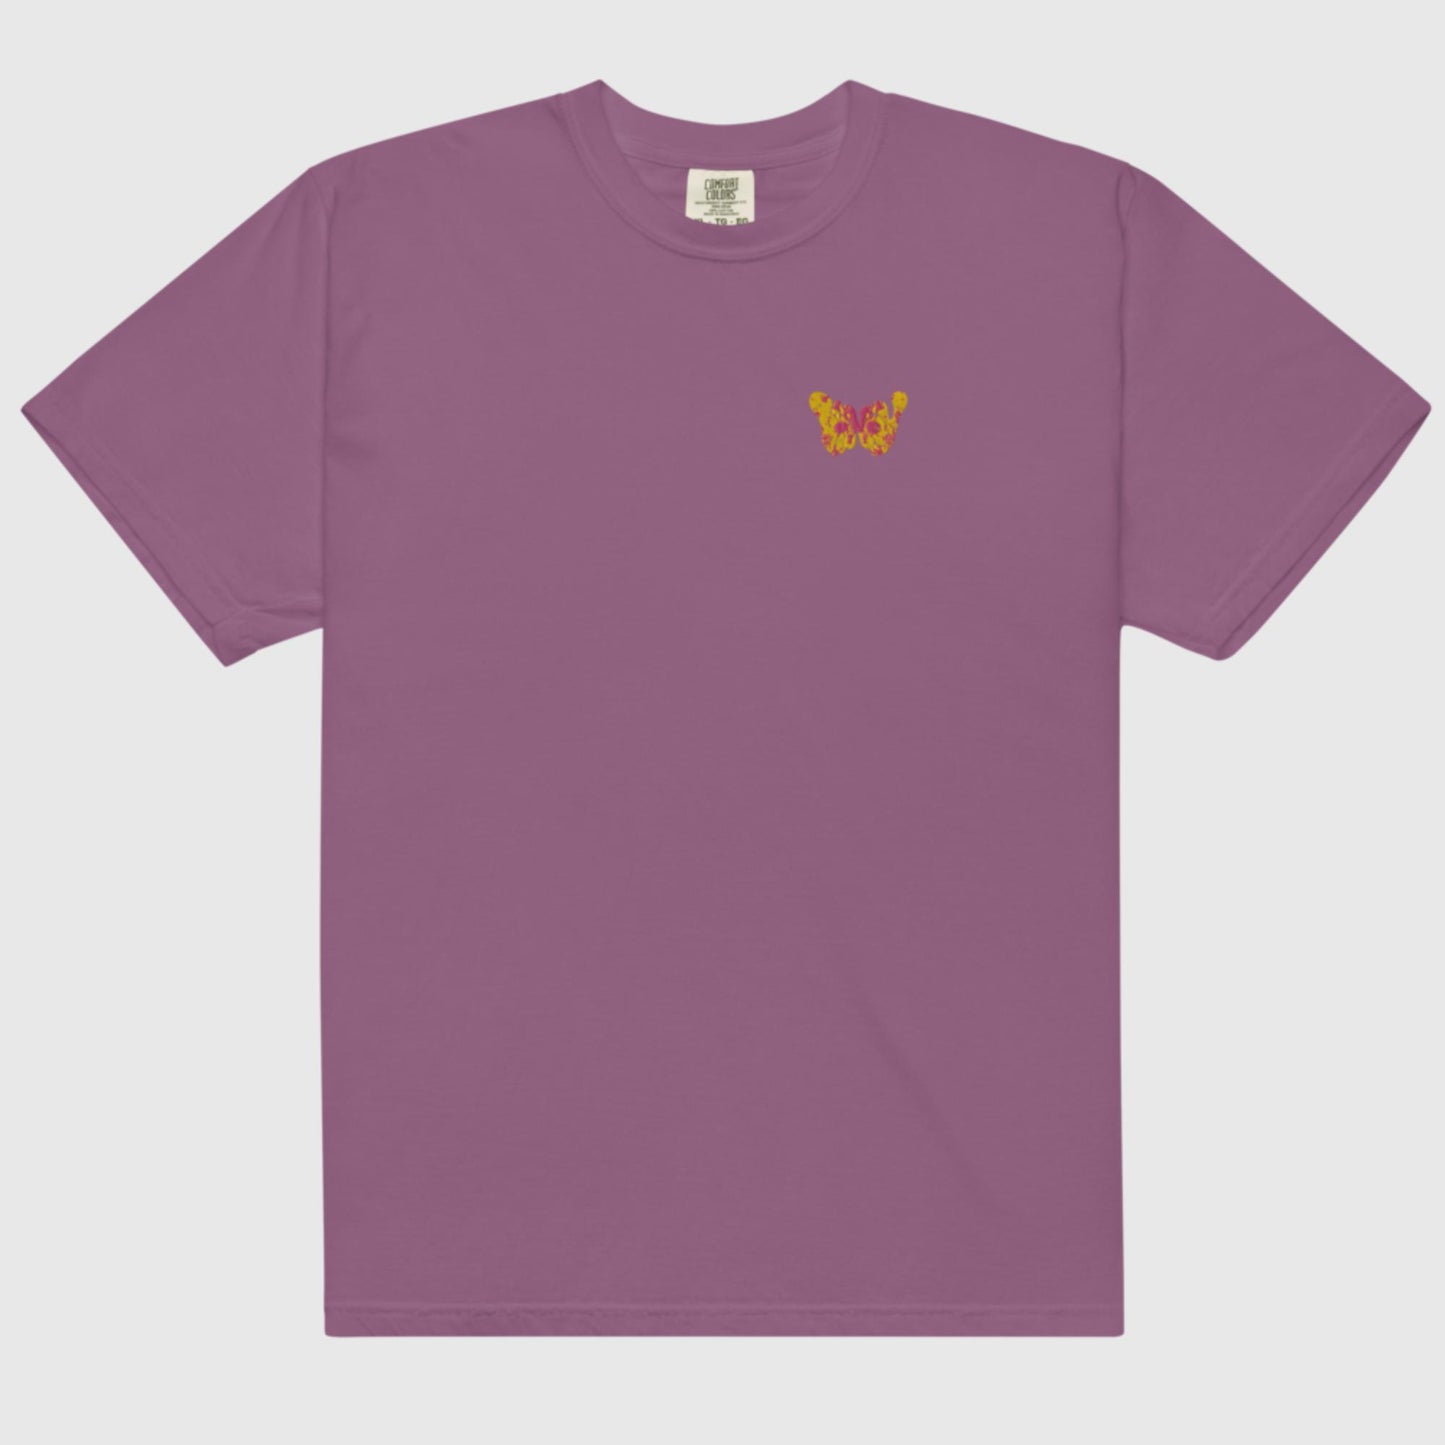 BINOY Embroidered Tee in Berry